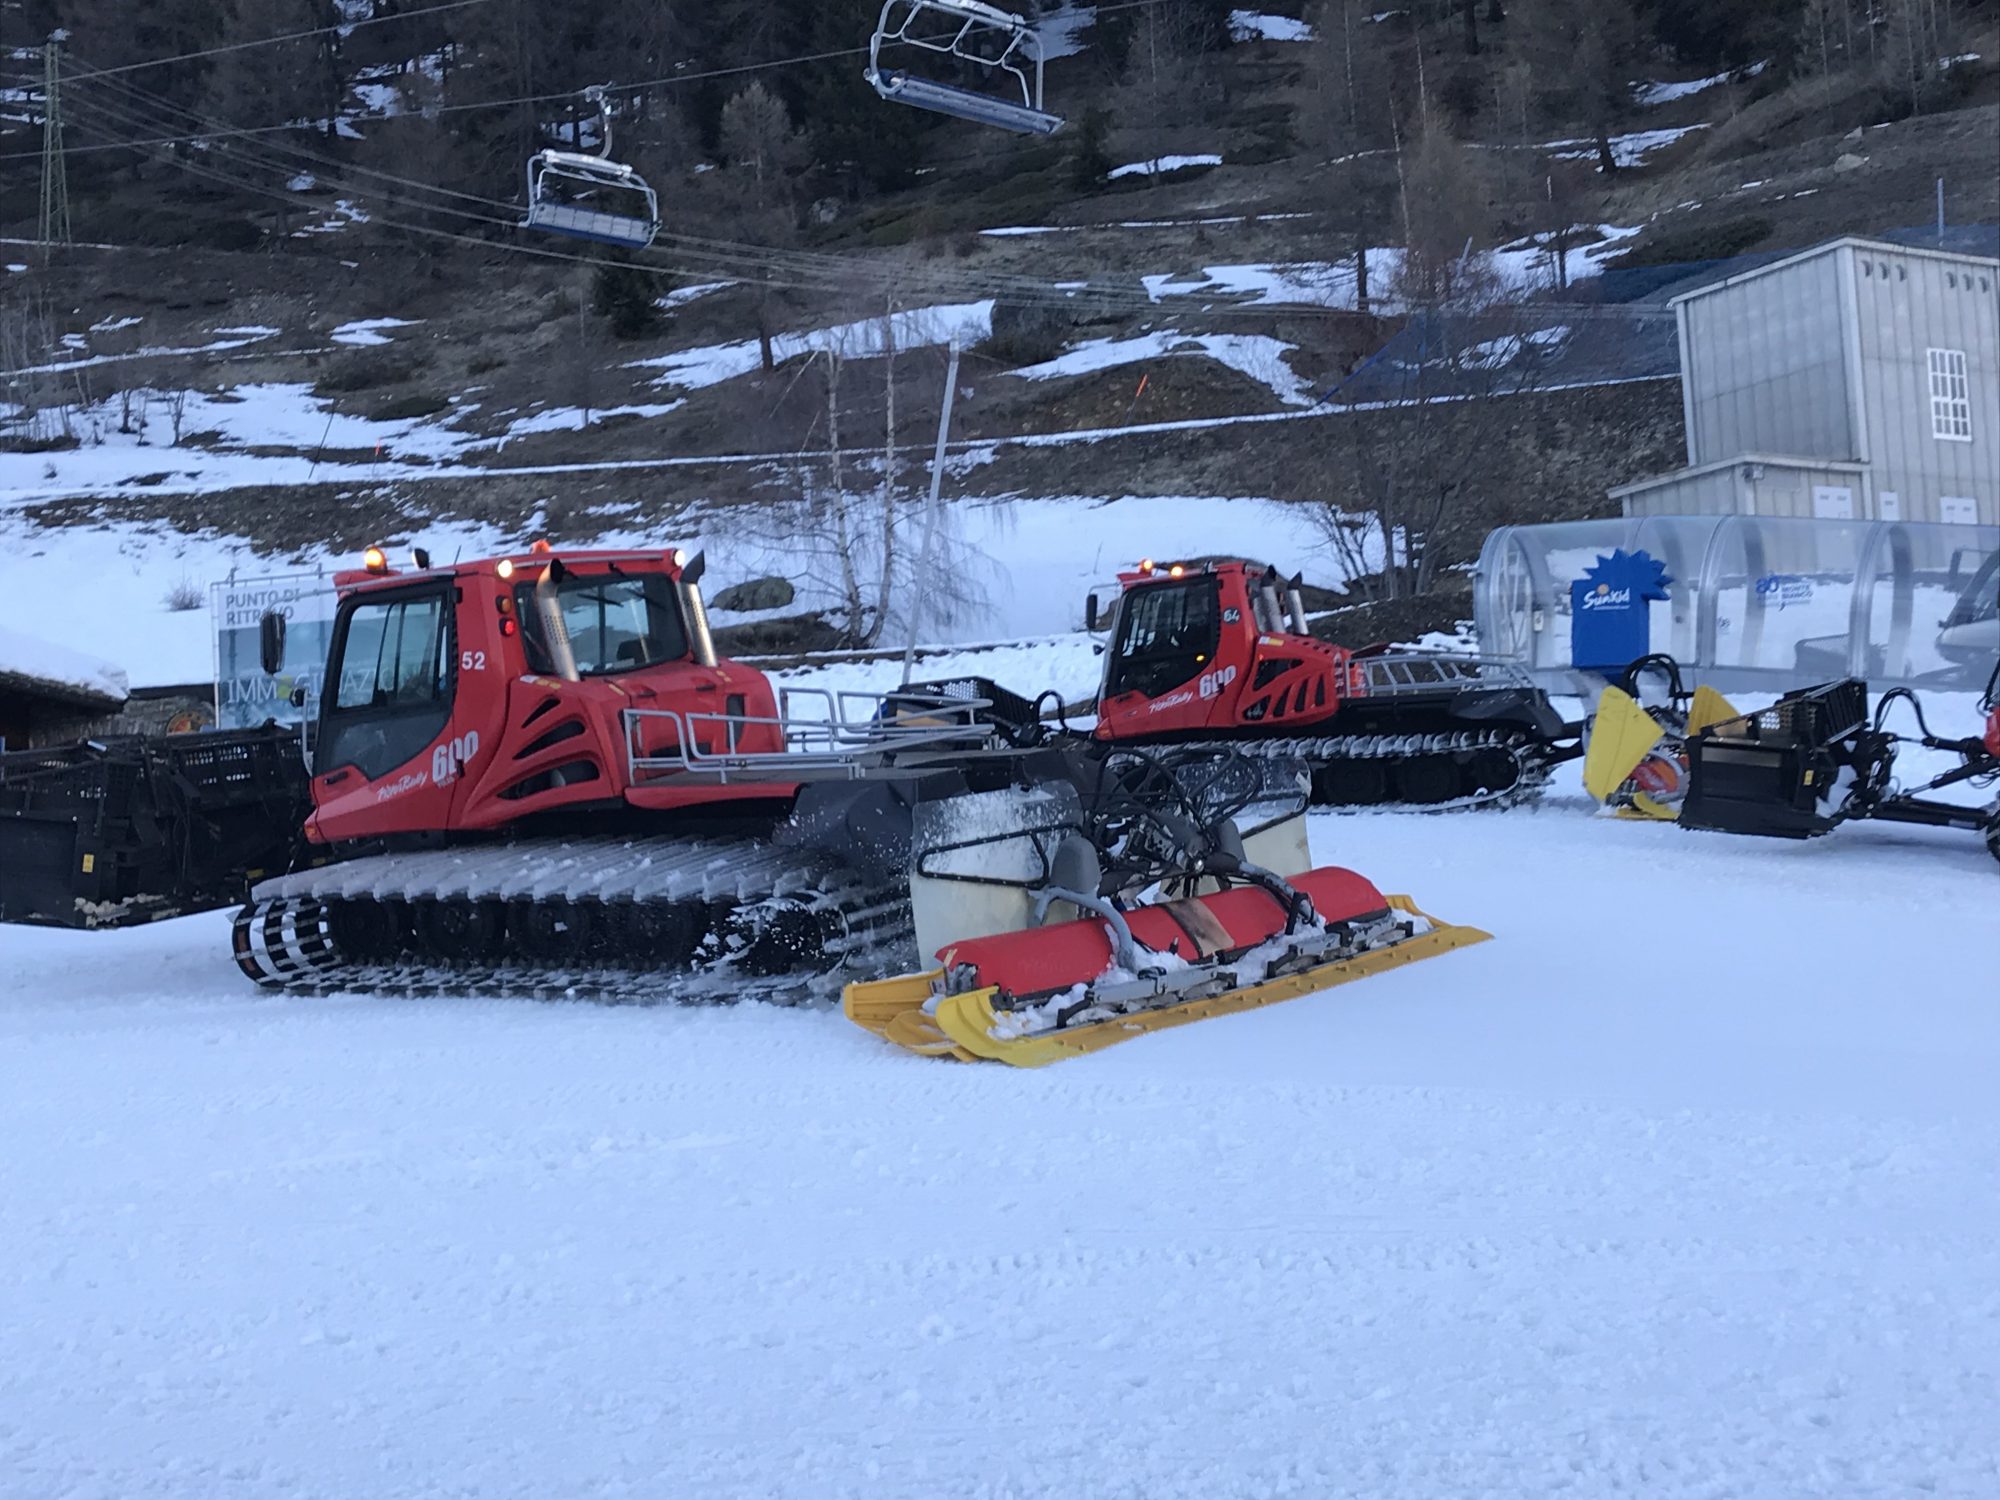 Snow groomers getting ready to work on the slopes of Courmayeur. Photo: The-Ski-Guru. How ski grooming patterns can affect visibility in the snow. 